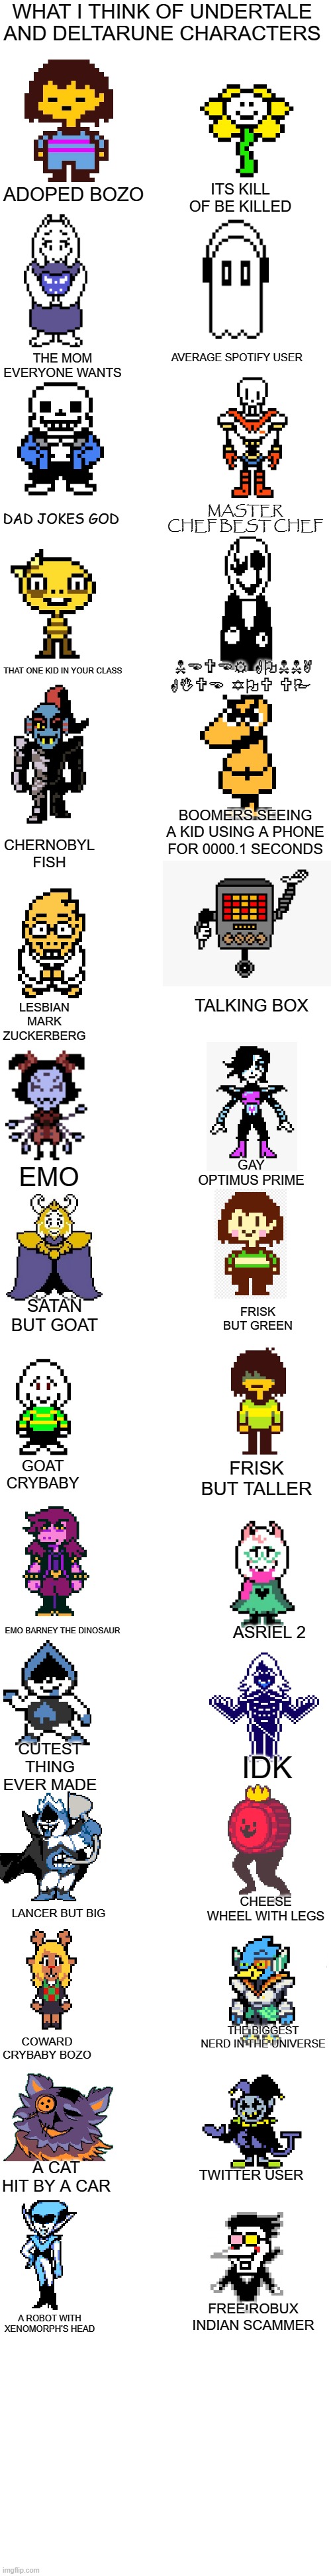 true | WHAT I THINK OF UNDERTALE AND DELTARUNE CHARACTERS; ADOPED BOZO; ITS KILL OF BE KILLED; AVERAGE SPOTIFY USER; THE MOM EVERYONE WANTS; MASTER CHEF BEST CHEF; DAD JOKES GOD; NEVER GONNA GIVE YOU UP; THAT ONE KID IN YOUR CLASS; BOOMERS SEEING A KID USING A PHONE FOR 0000.1 SECONDS; CHERNOBYL FISH; LESBIAN MARK ZUCKERBERG; TALKING BOX; GAY OPTIMUS PRIME; EMO; SATAN BUT GOAT; FRISK BUT GREEN; GOAT CRYBABY; FRISK BUT TALLER; ASRIEL 2; EMO BARNEY THE DINOSAUR; CUTEST THING EVER MADE; IDK; CHEESE WHEEL WITH LEGS; LANCER BUT BIG; THE BIGGEST NERD IN THE UNIVERSE; COWARD CRYBABY BOZO; A CAT HIT BY A CAR; TWITTER USER; FREE ROBUX INDIAN SCAMMER; A ROBOT WITH XENOMORPH'S HEAD | image tagged in long blank white | made w/ Imgflip meme maker